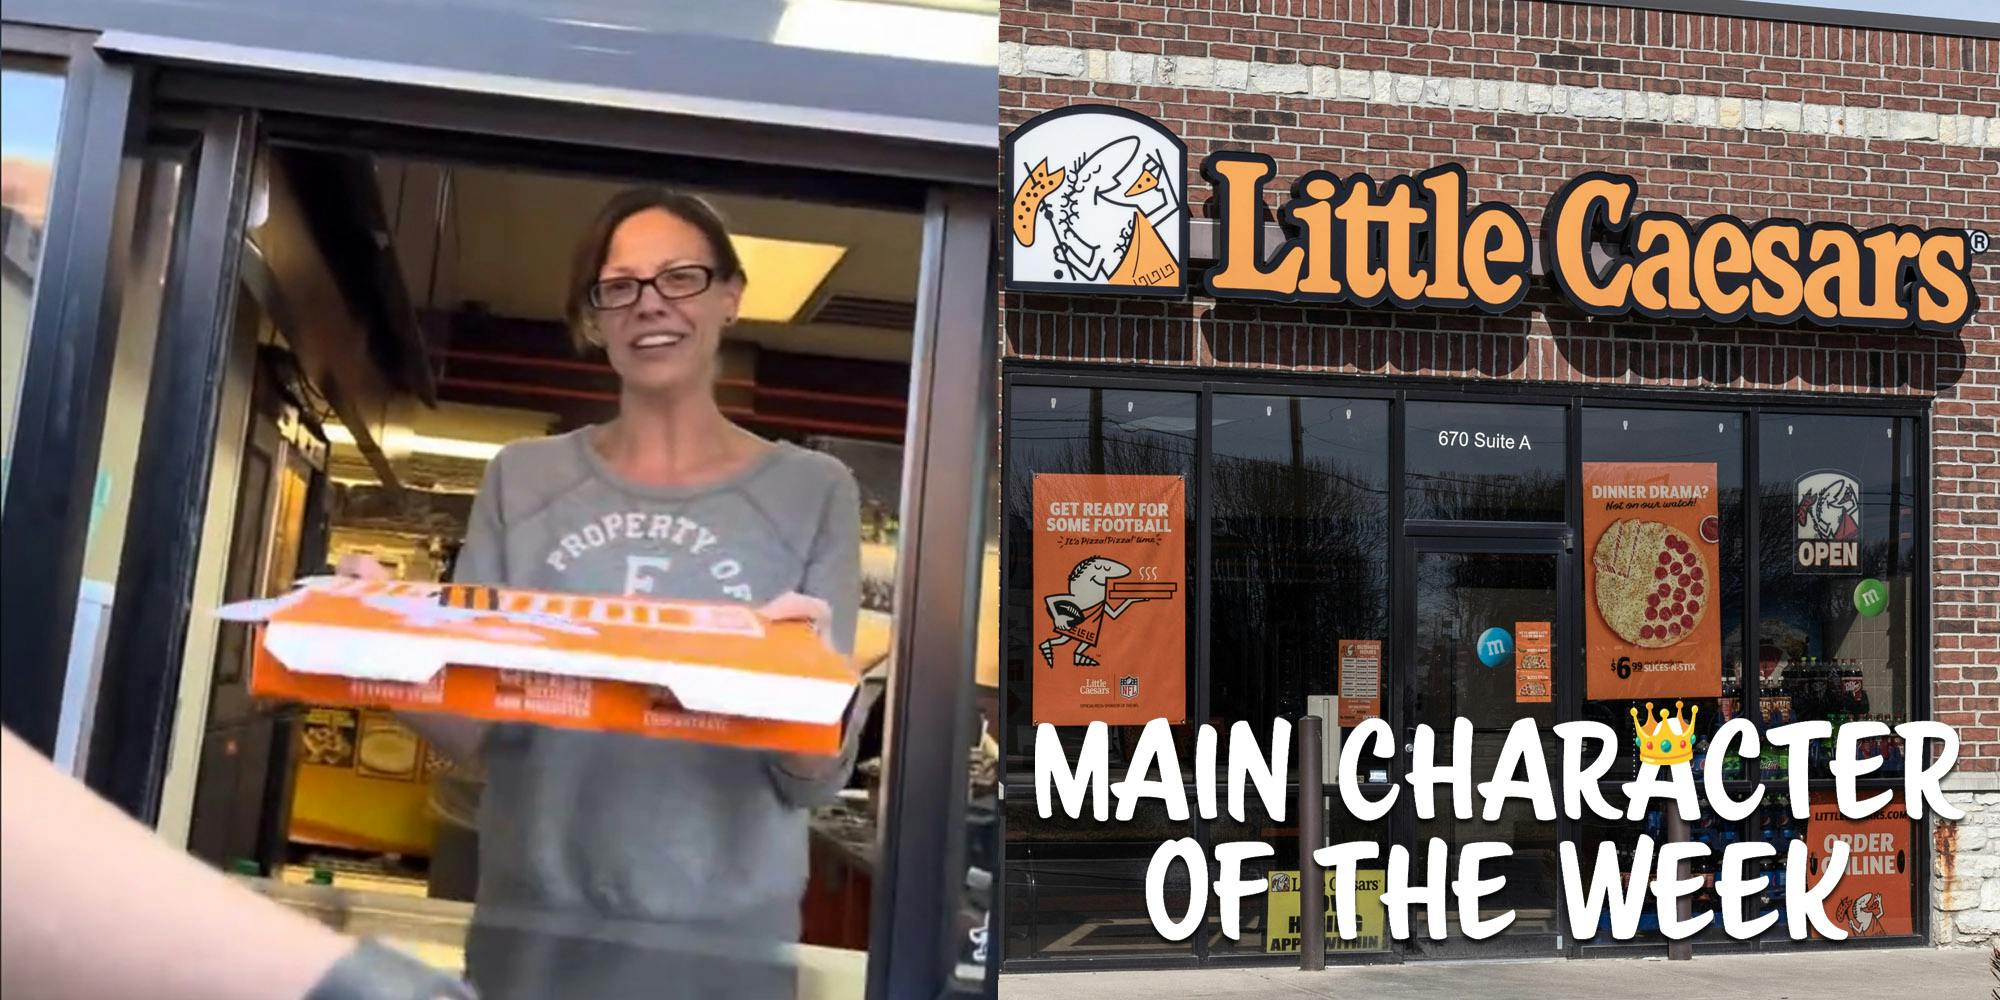 A Little Caesars manager holding a pizza. A Little Caesars sign is on the right hand side. Text that says 'Main Character of the Week' in a web_crawlr font is in the bottom right corner.